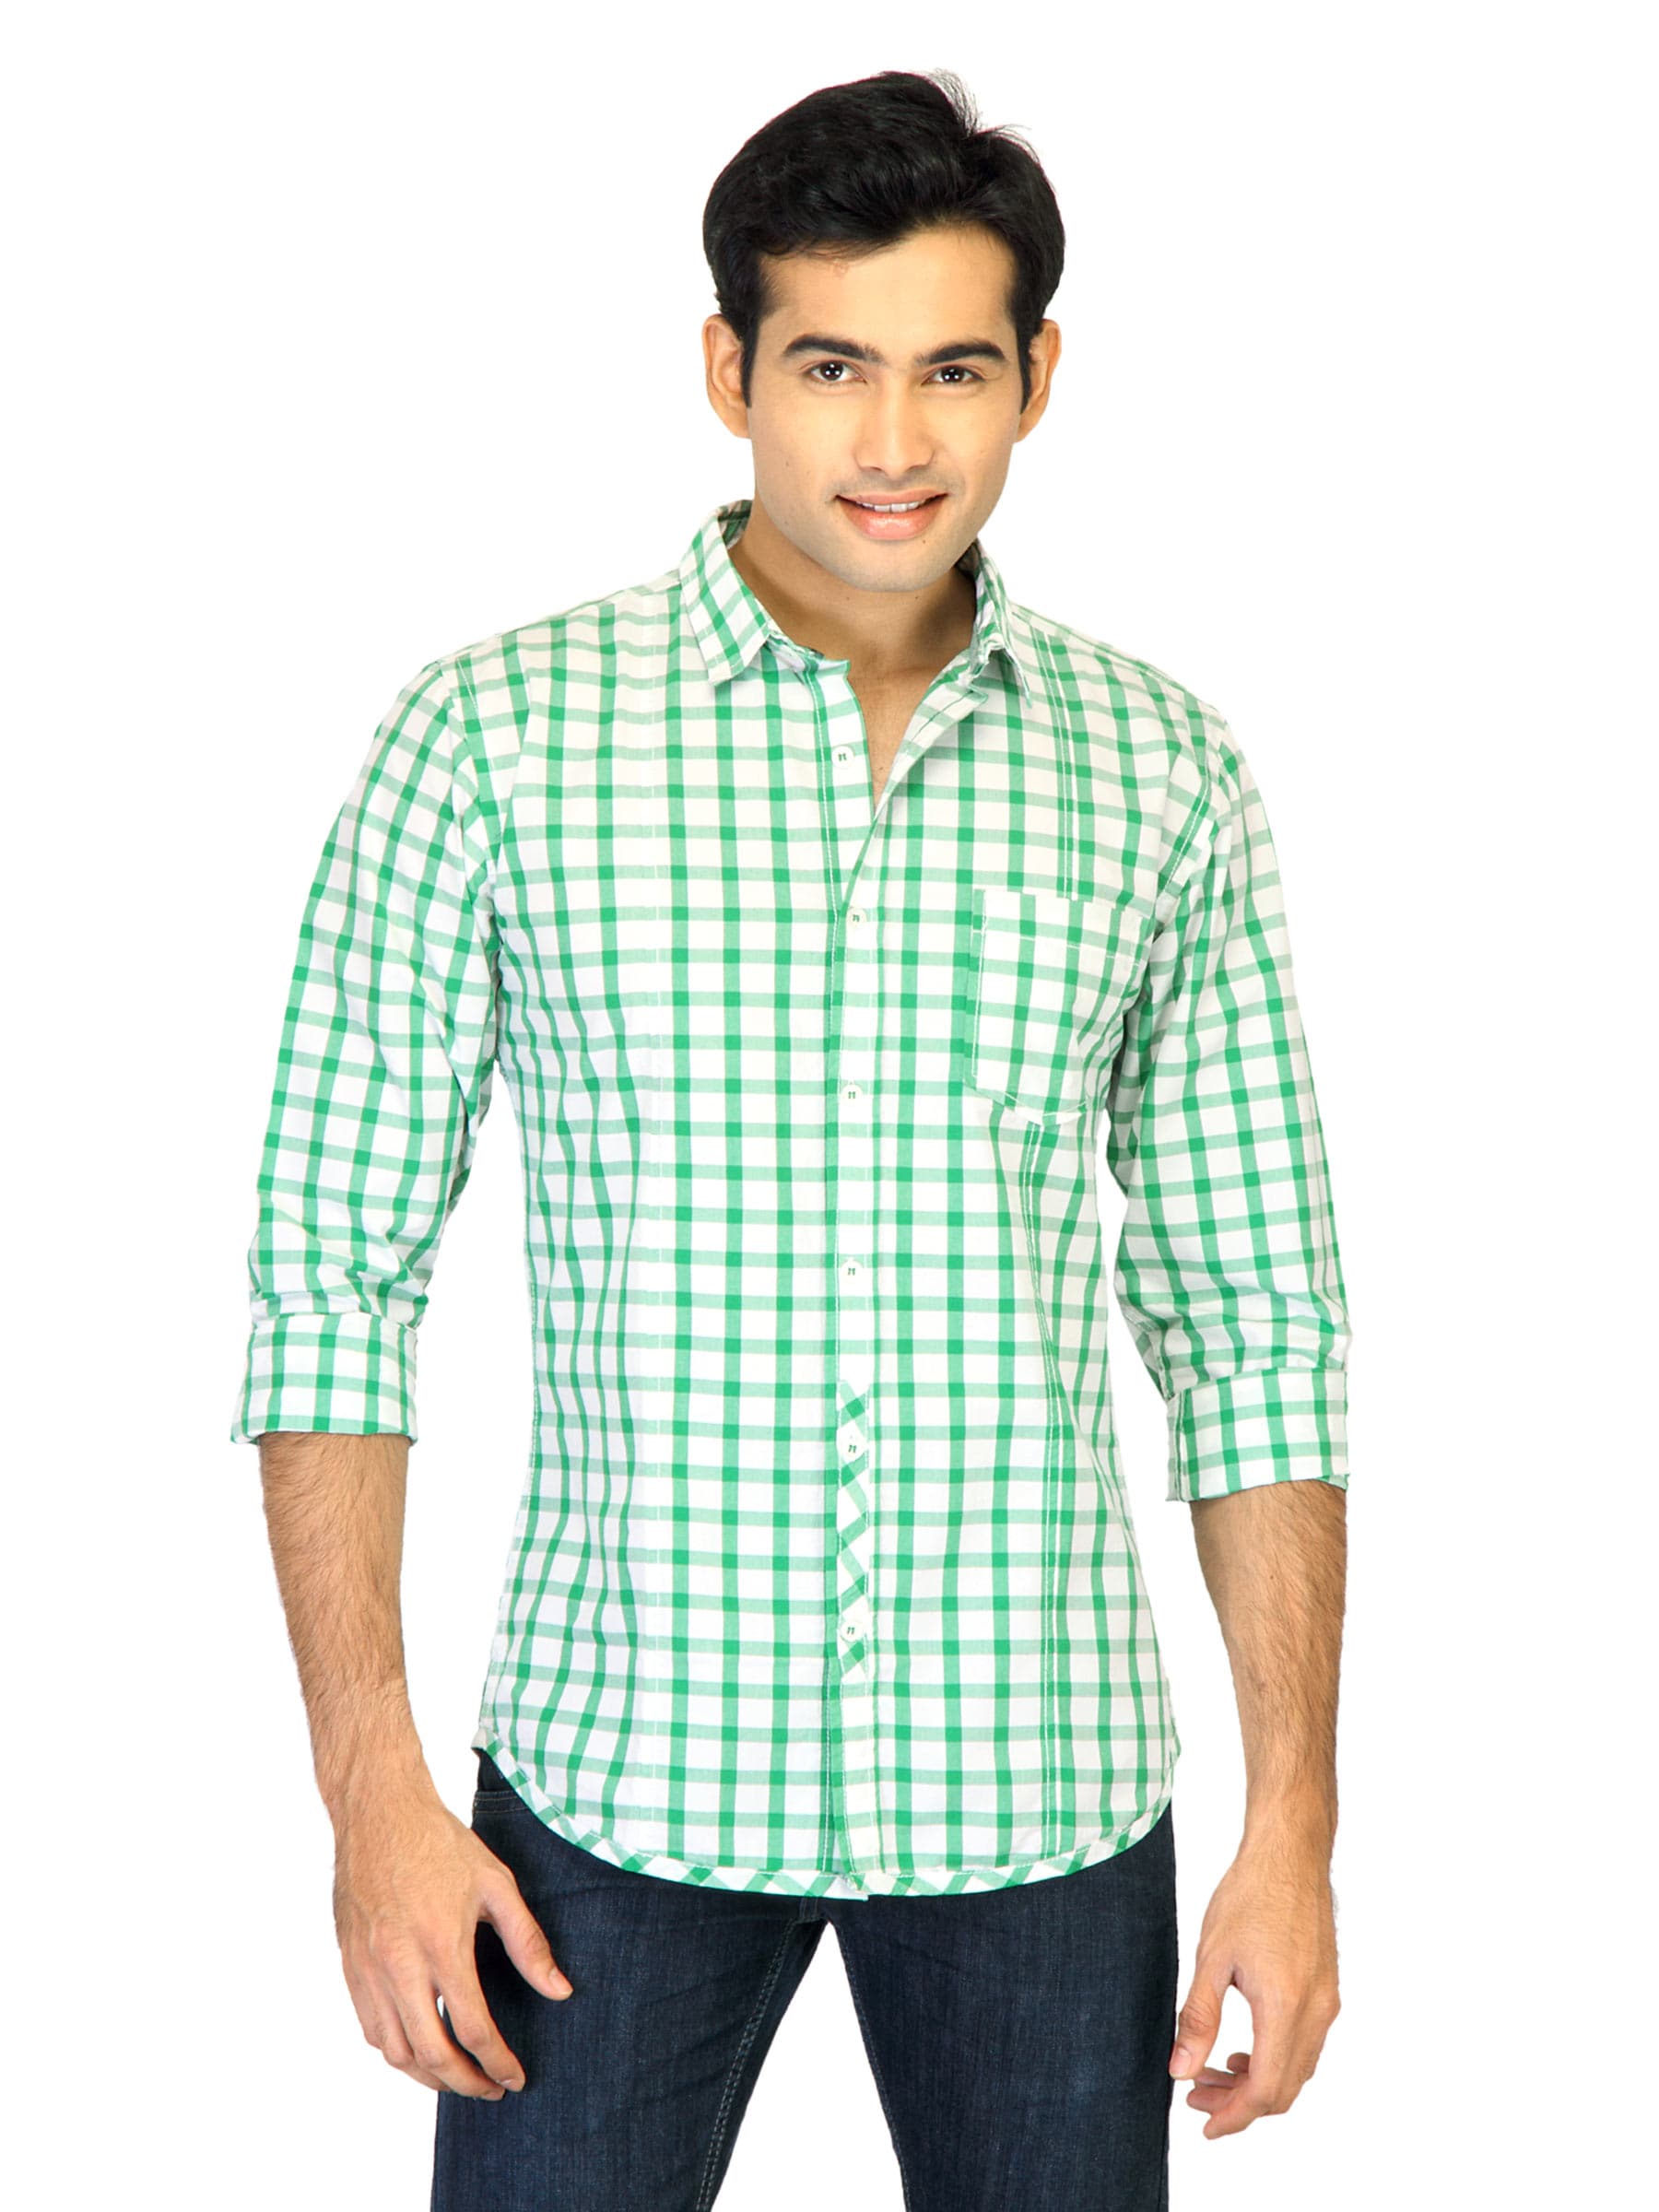 United Colors of Benetton Men Check Green Shirts